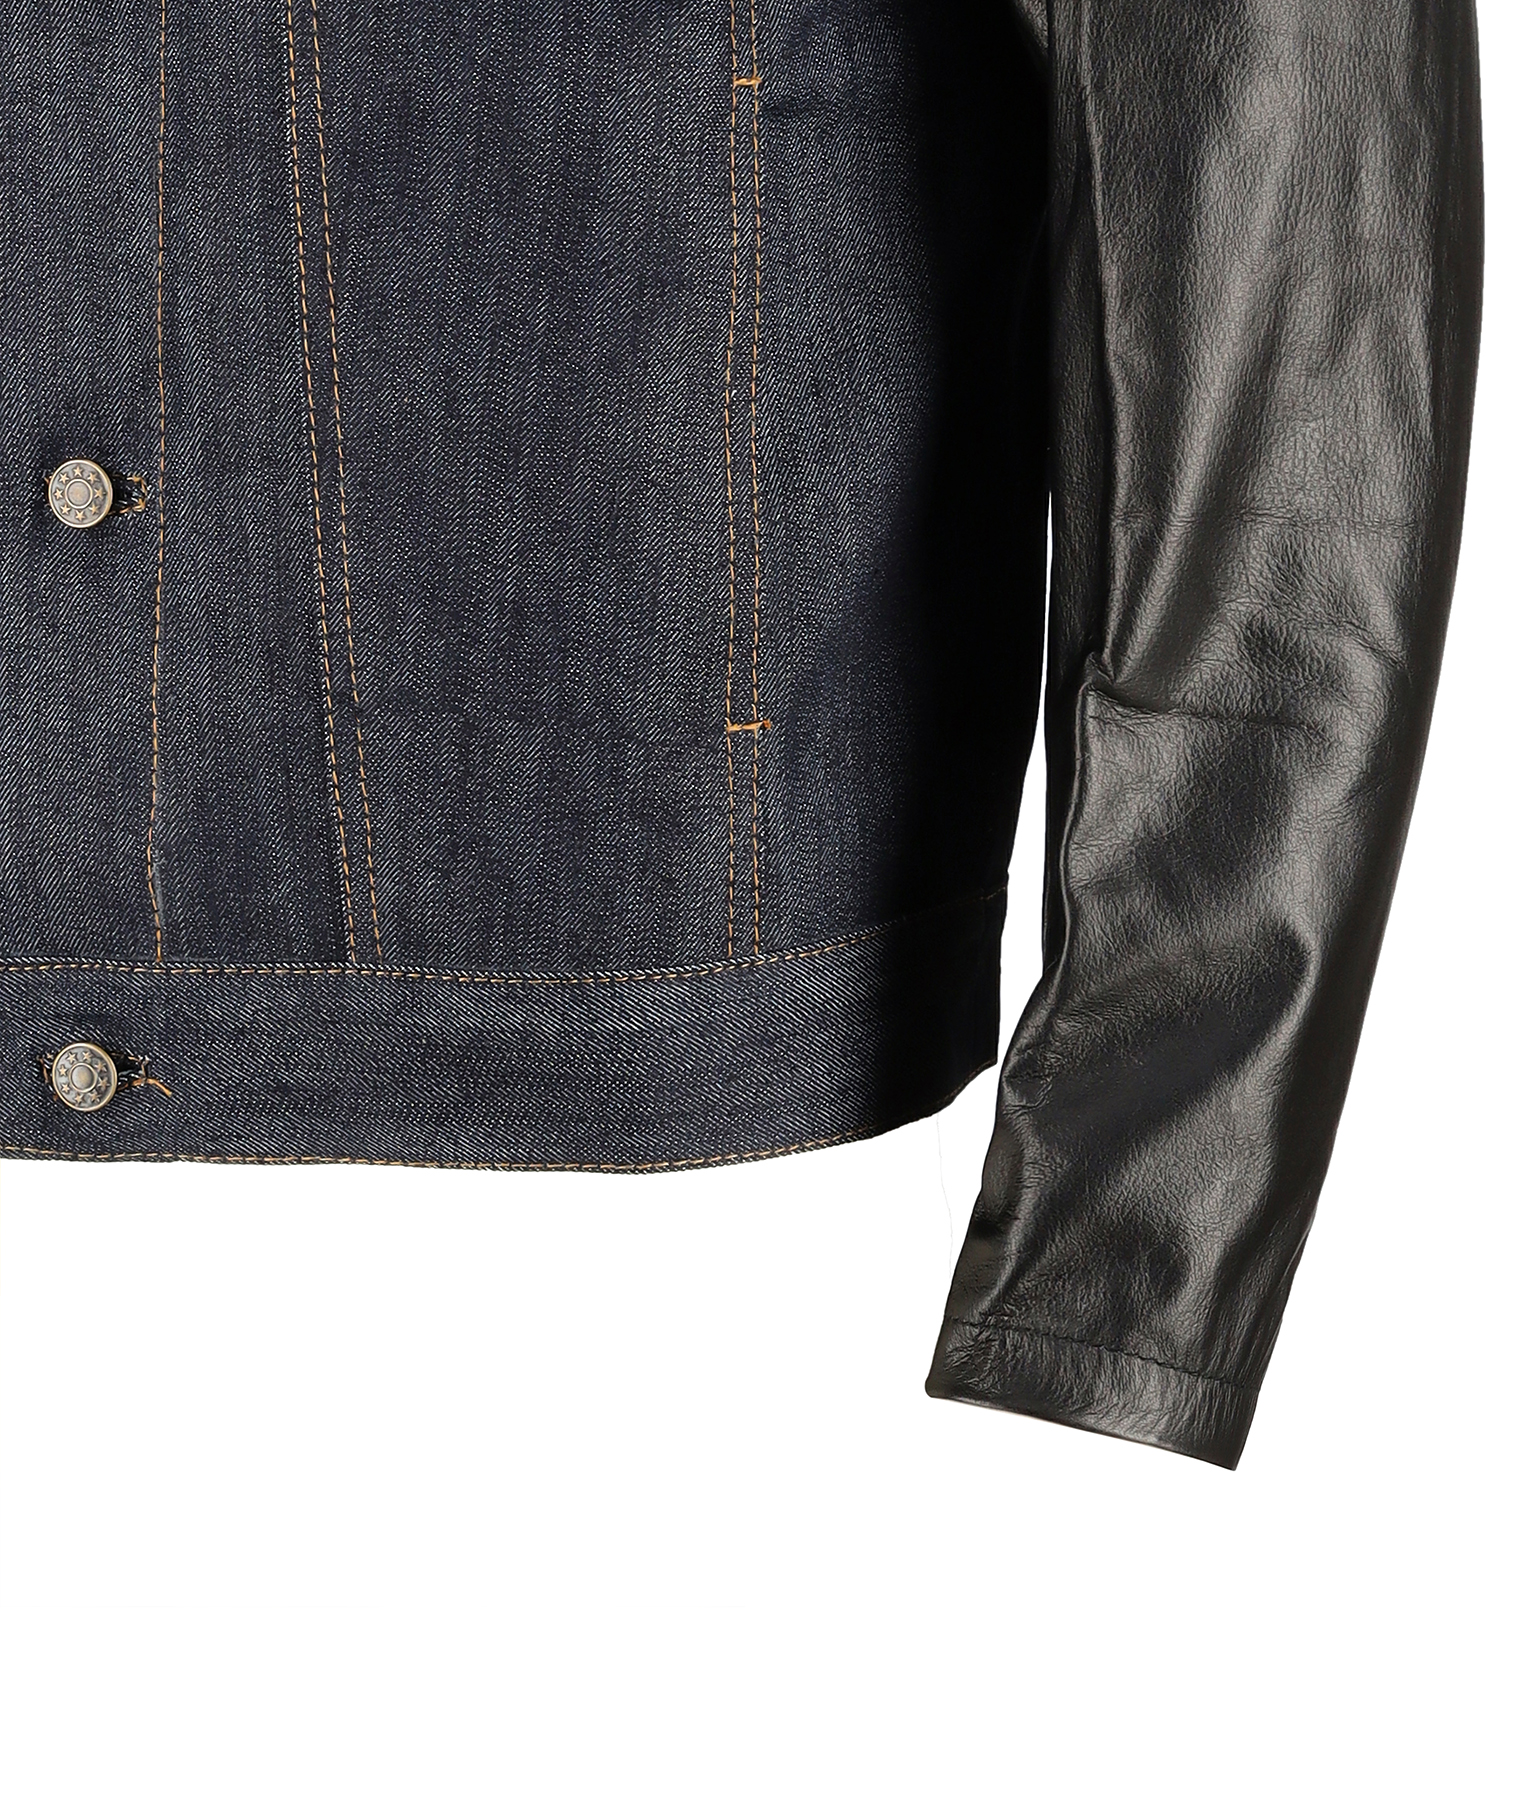 Men’s Denim Jacket with Leather Sleeves